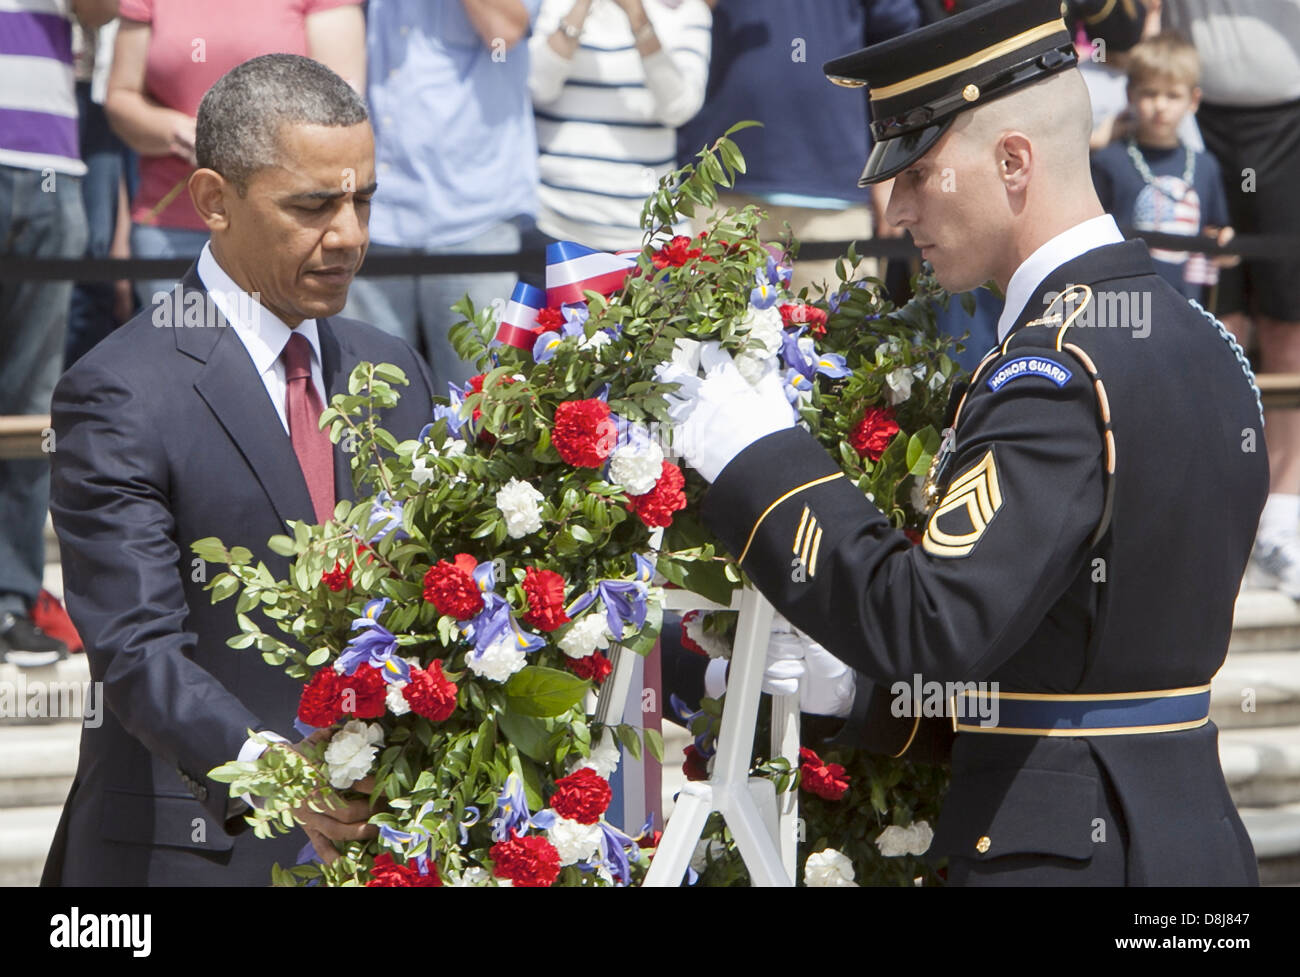 US President Barack Obama places a wreath on the Tomb of the Unknown Soldier in honor of Memorial Day at Arlington National Cemetery May 27, 2013 in Arlington , VA. Stock Photo